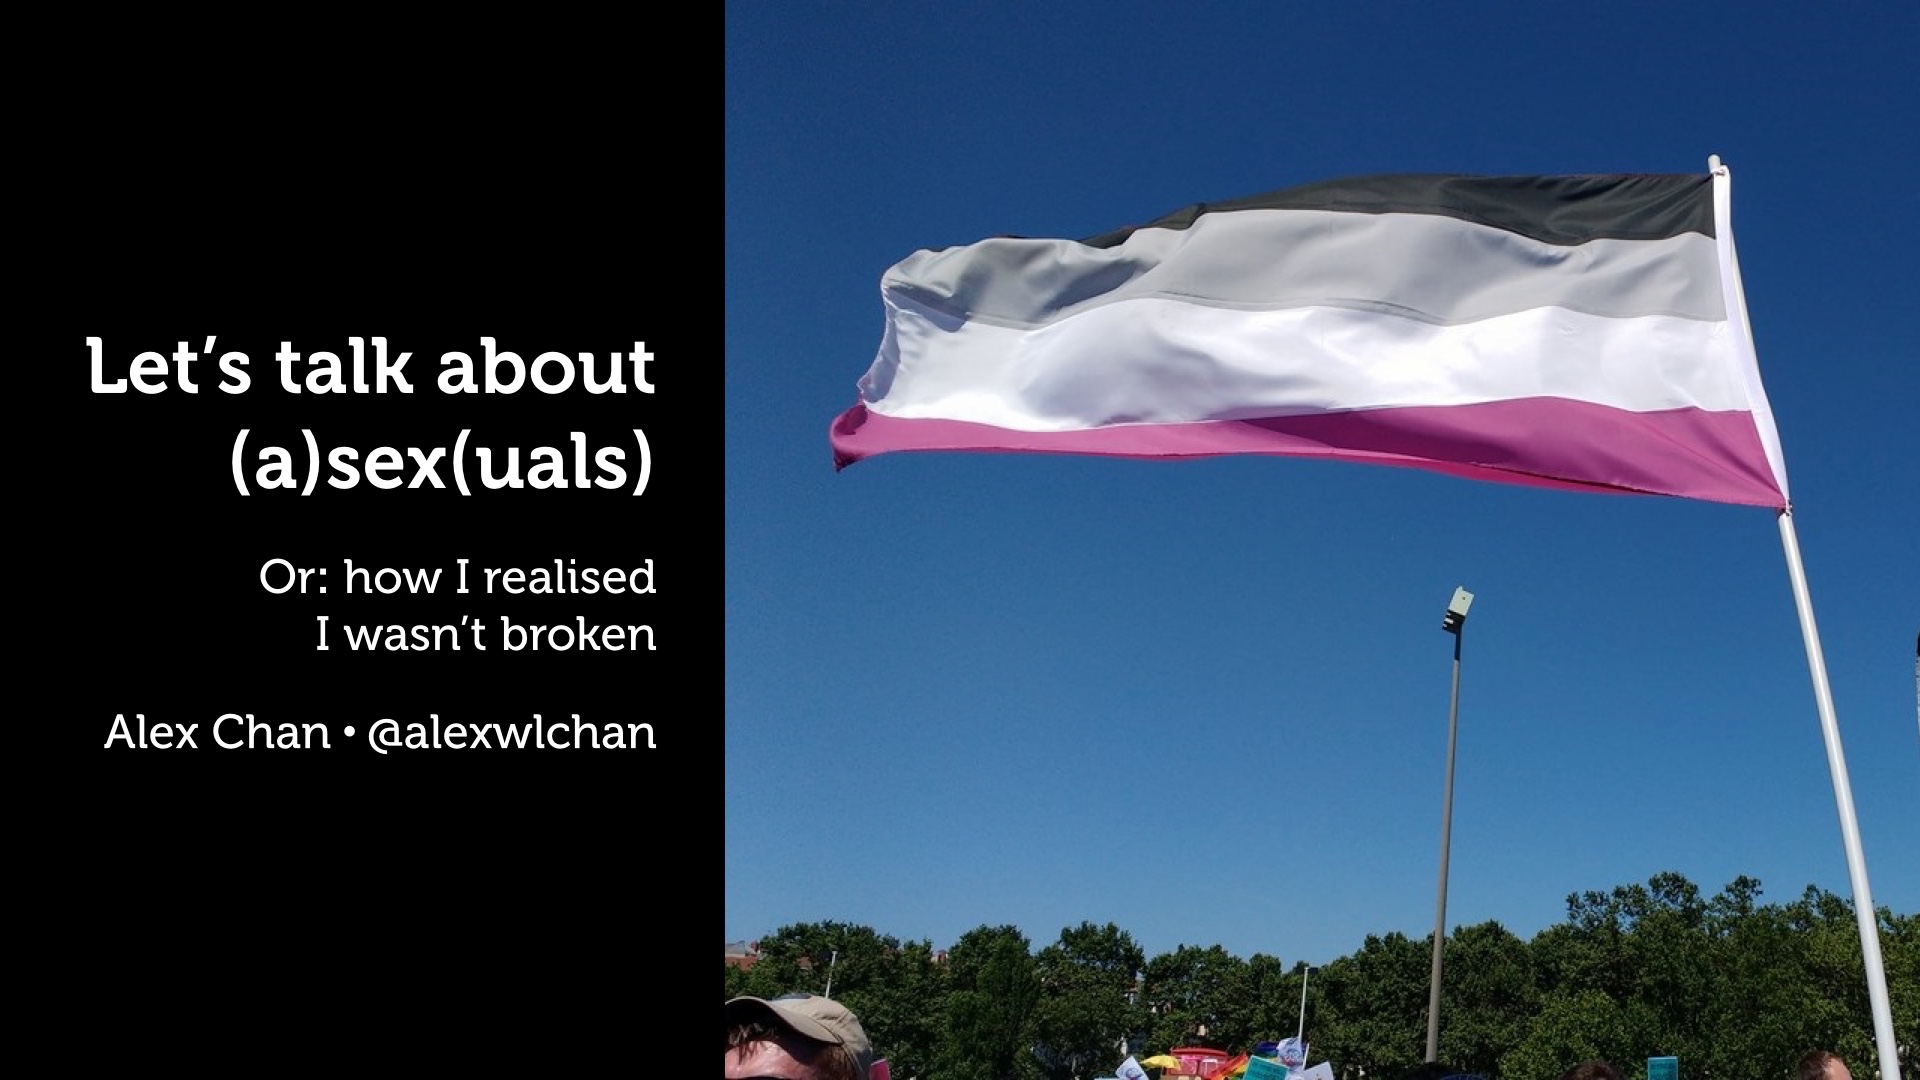 A slide titled “Let's talk about (a)sex(uals)” with an asexual pride flag.